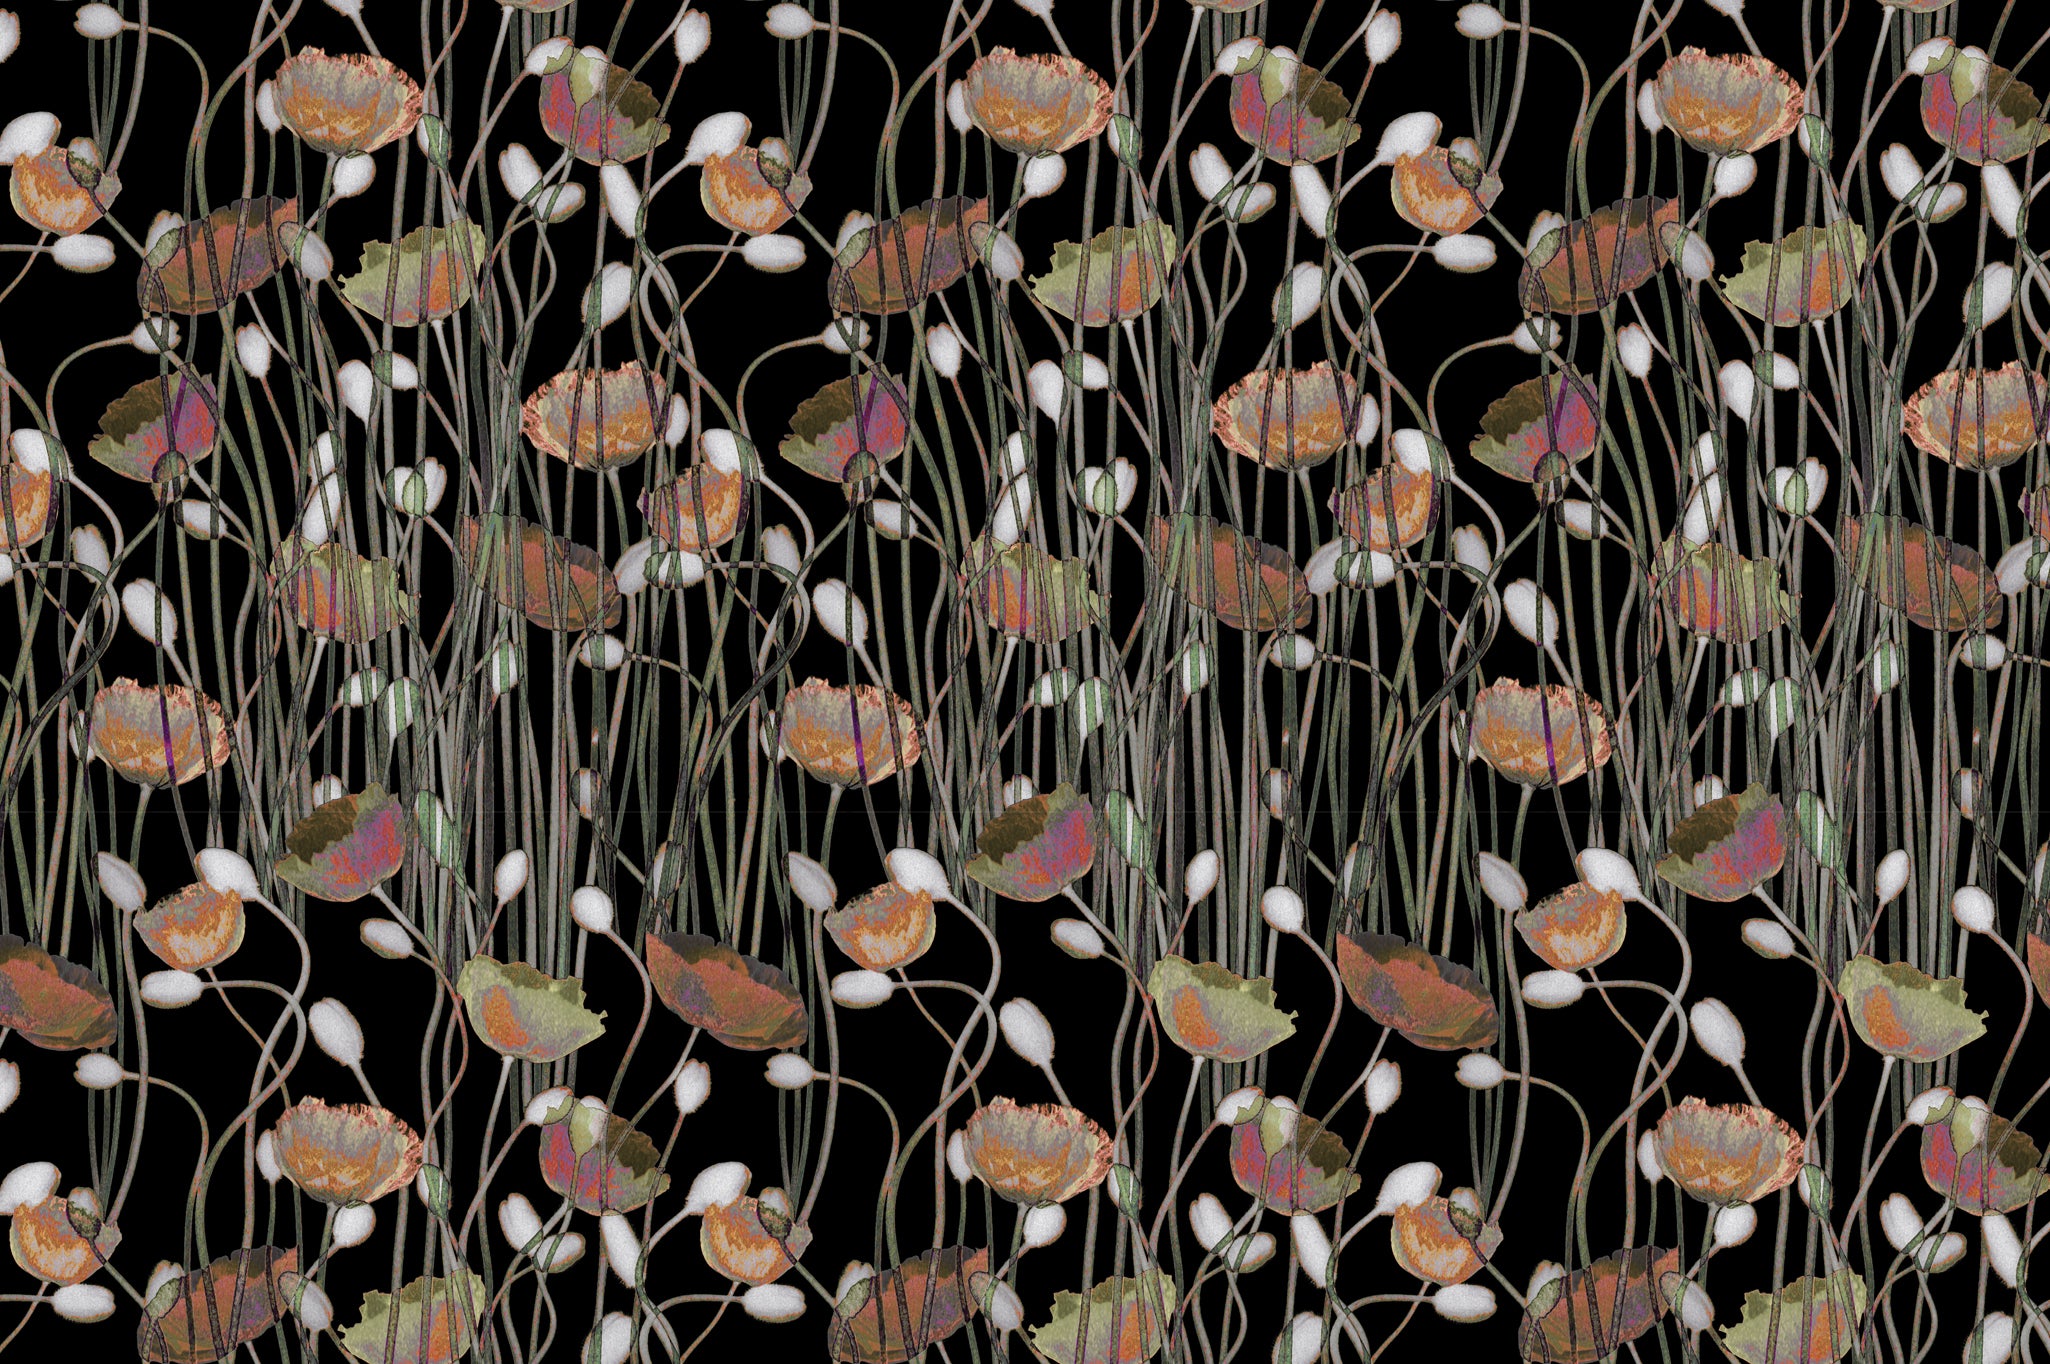 Detail of fabric in a dense poppy print in shades of red, white, orange and green on a black field.